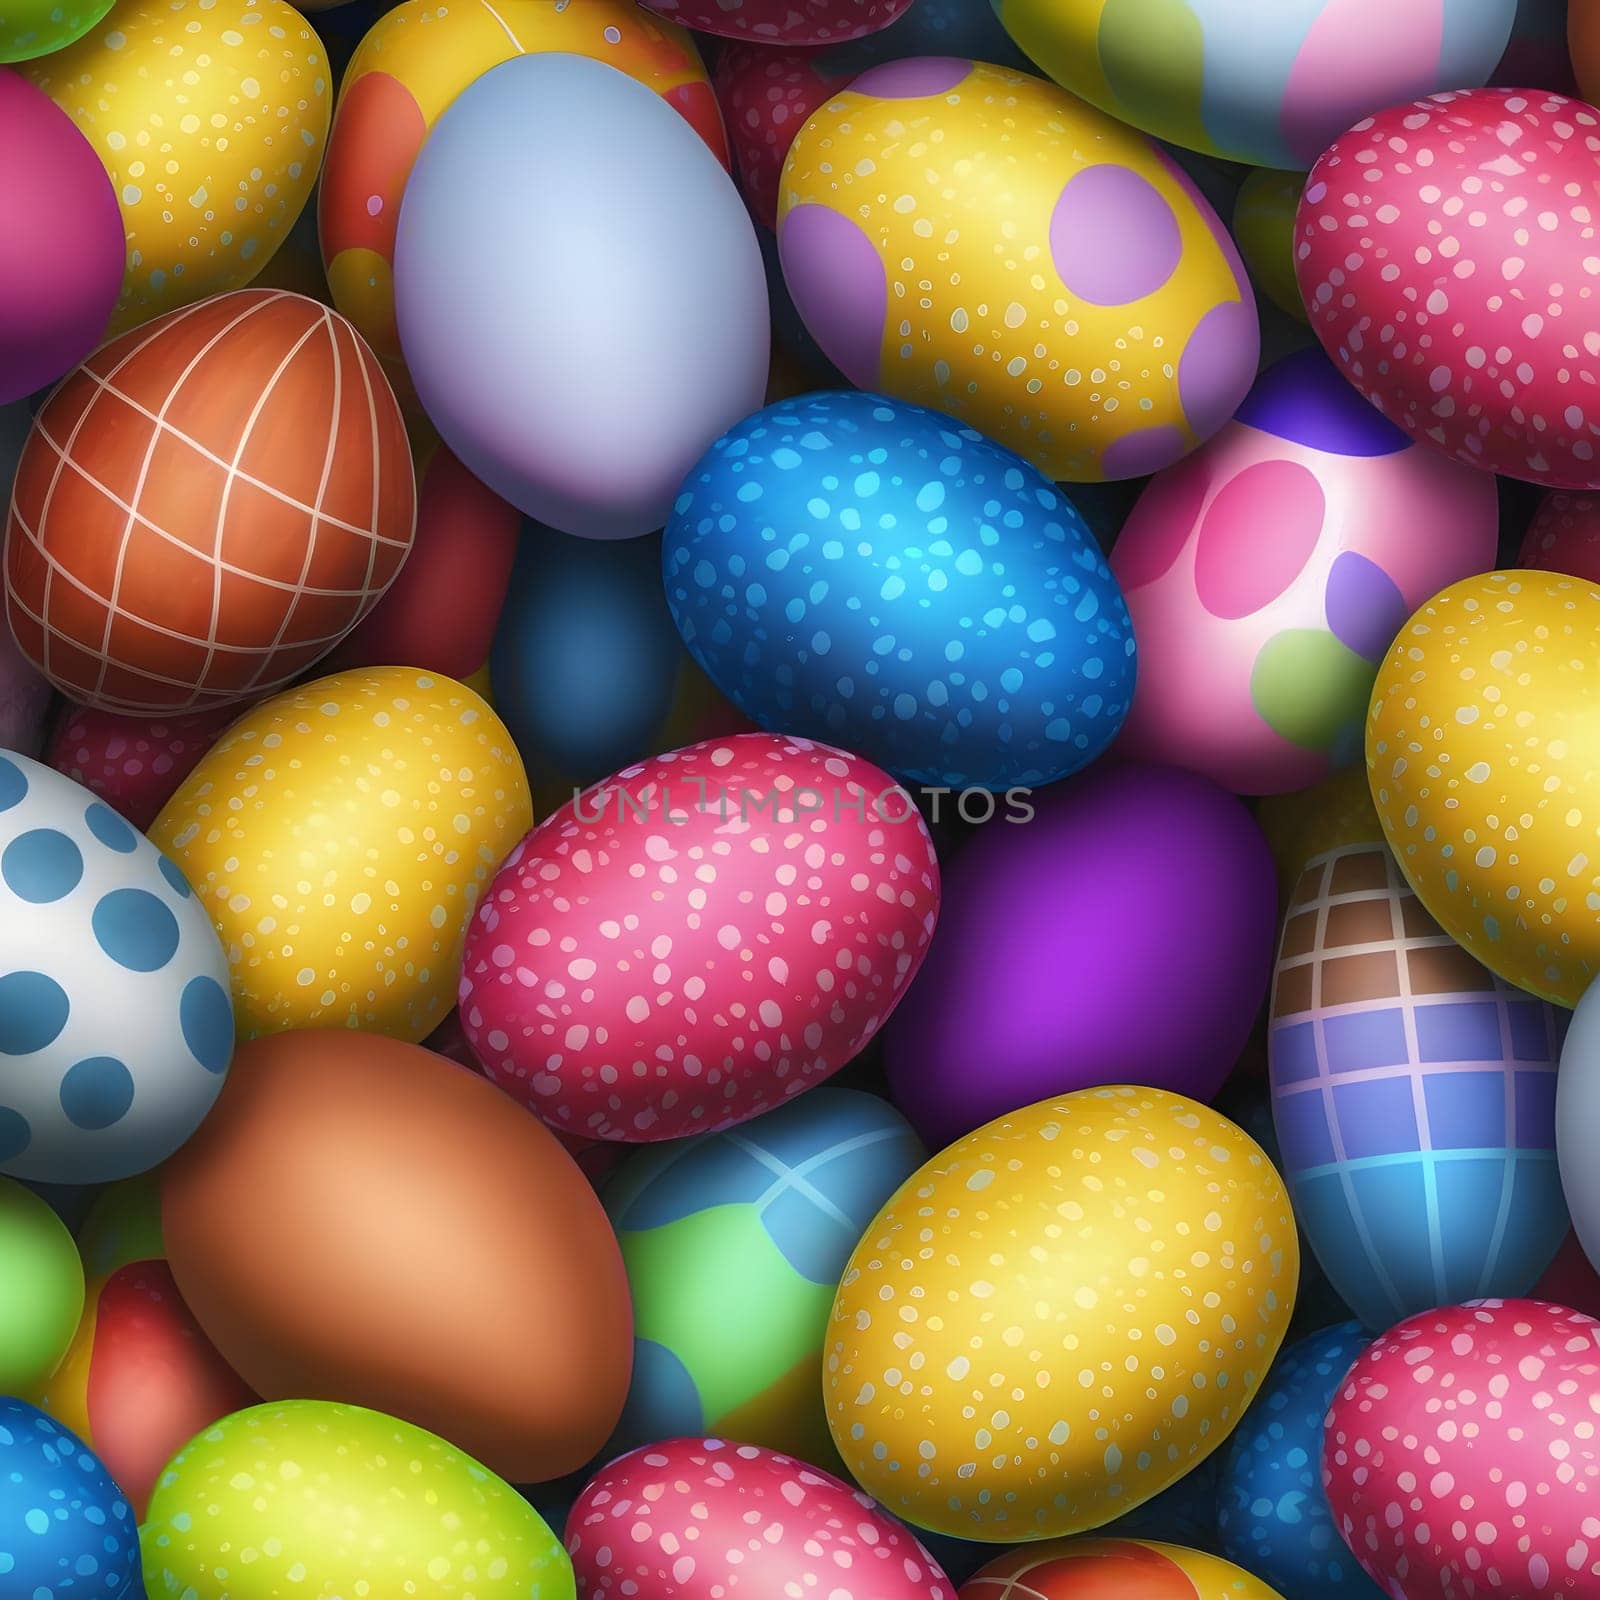 colorful easter eggs - full frame background, neural network generated art. Digitally generated image. Not based on any actual scene or pattern.